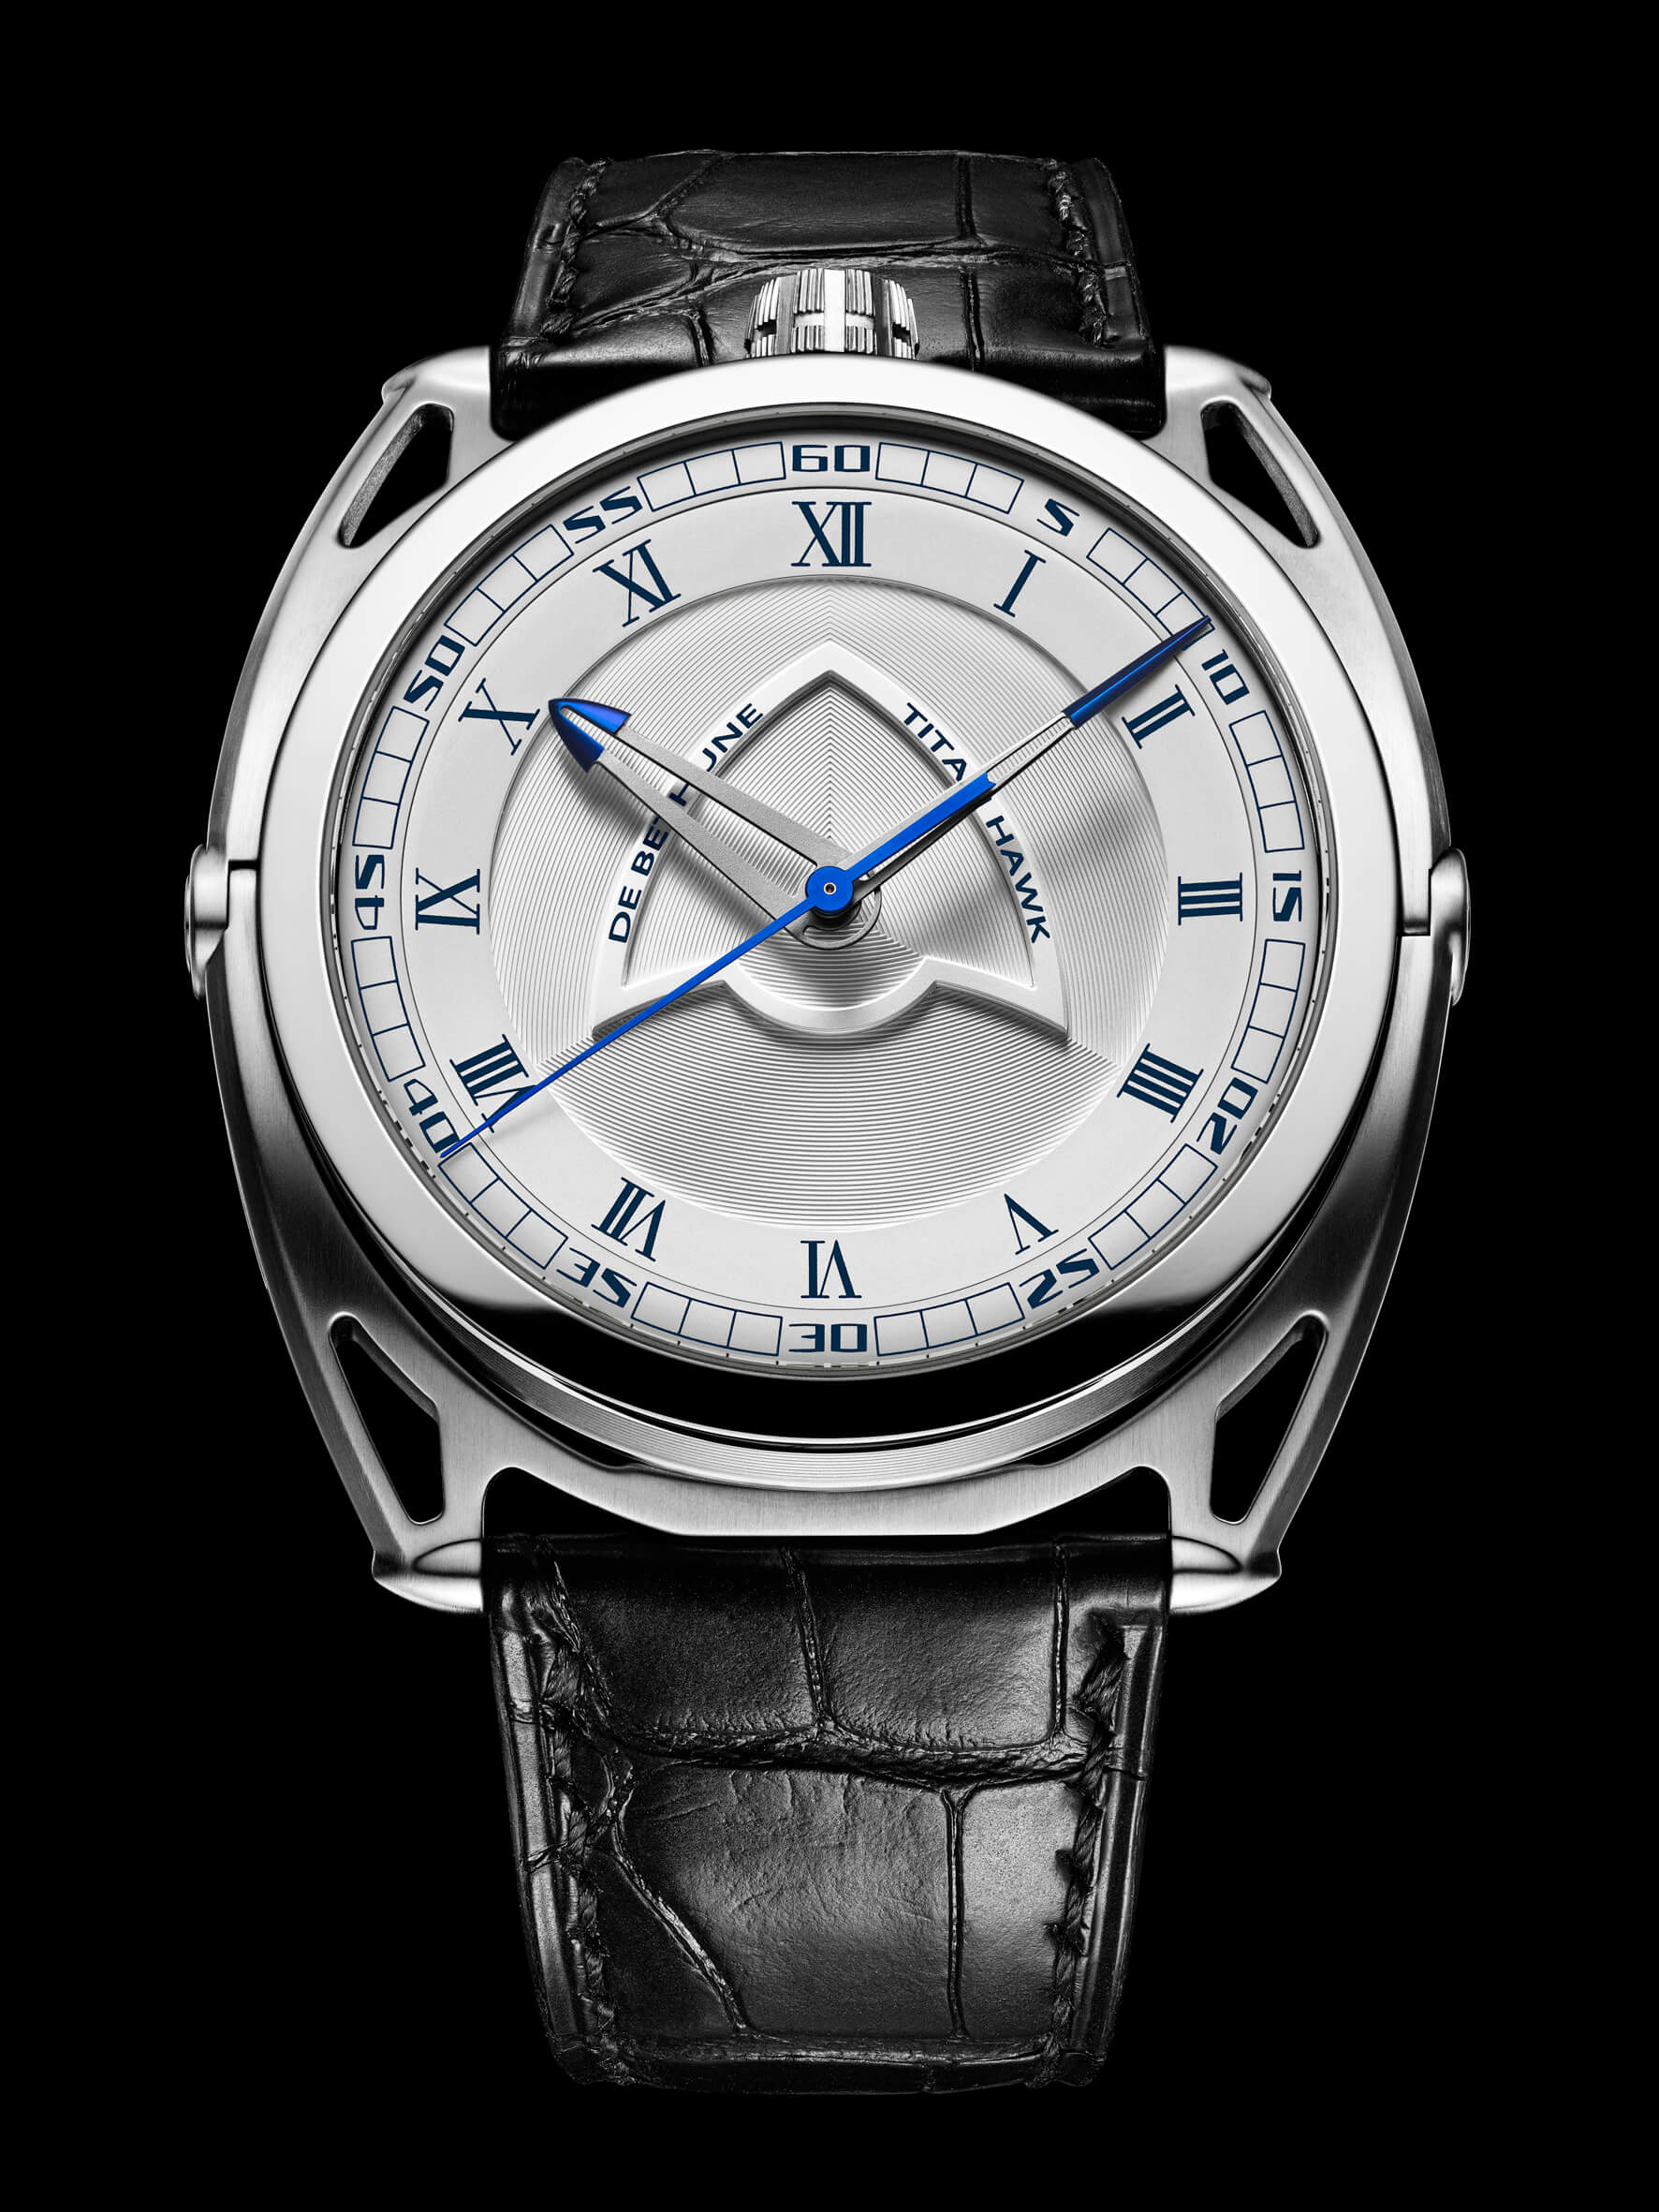 First Look: De Bethune at Baselworld 2018